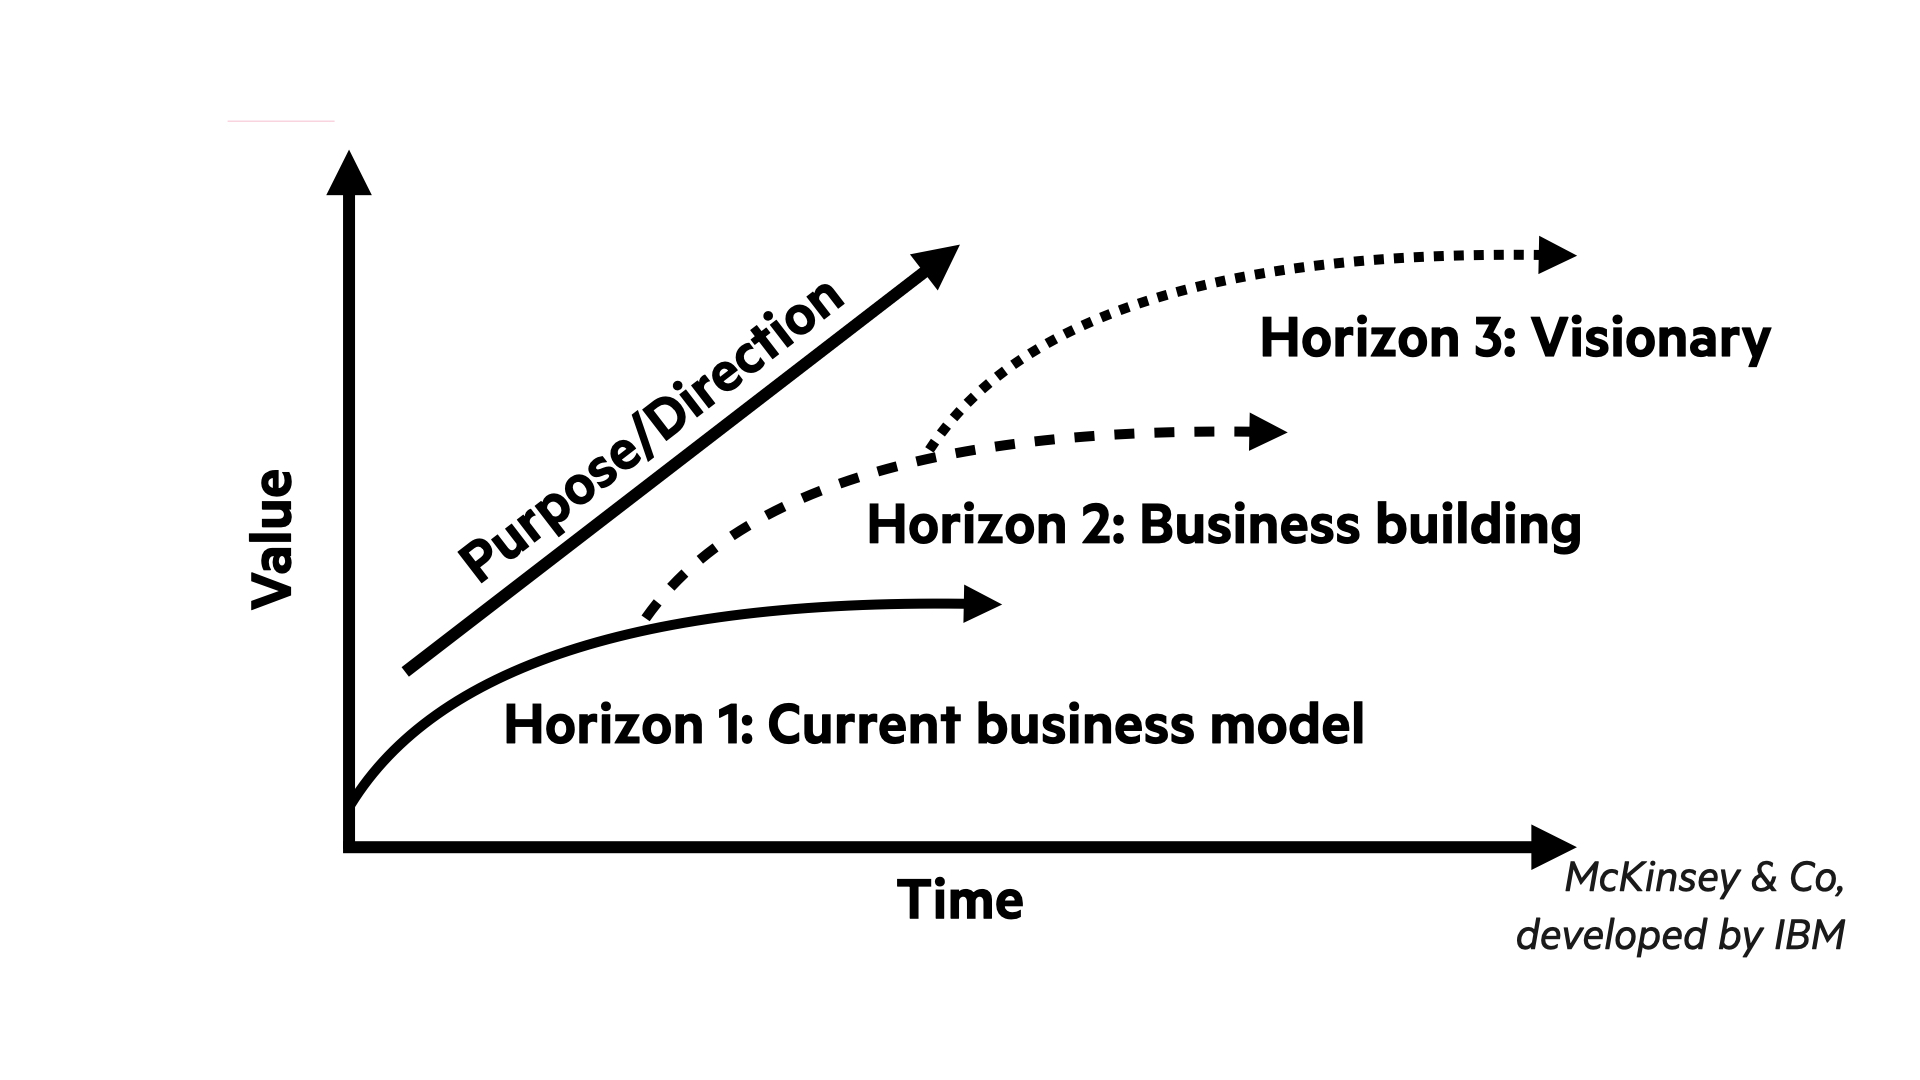 Line showing three horizons as described below, each line progressively further out in time, higher in value, and less defined